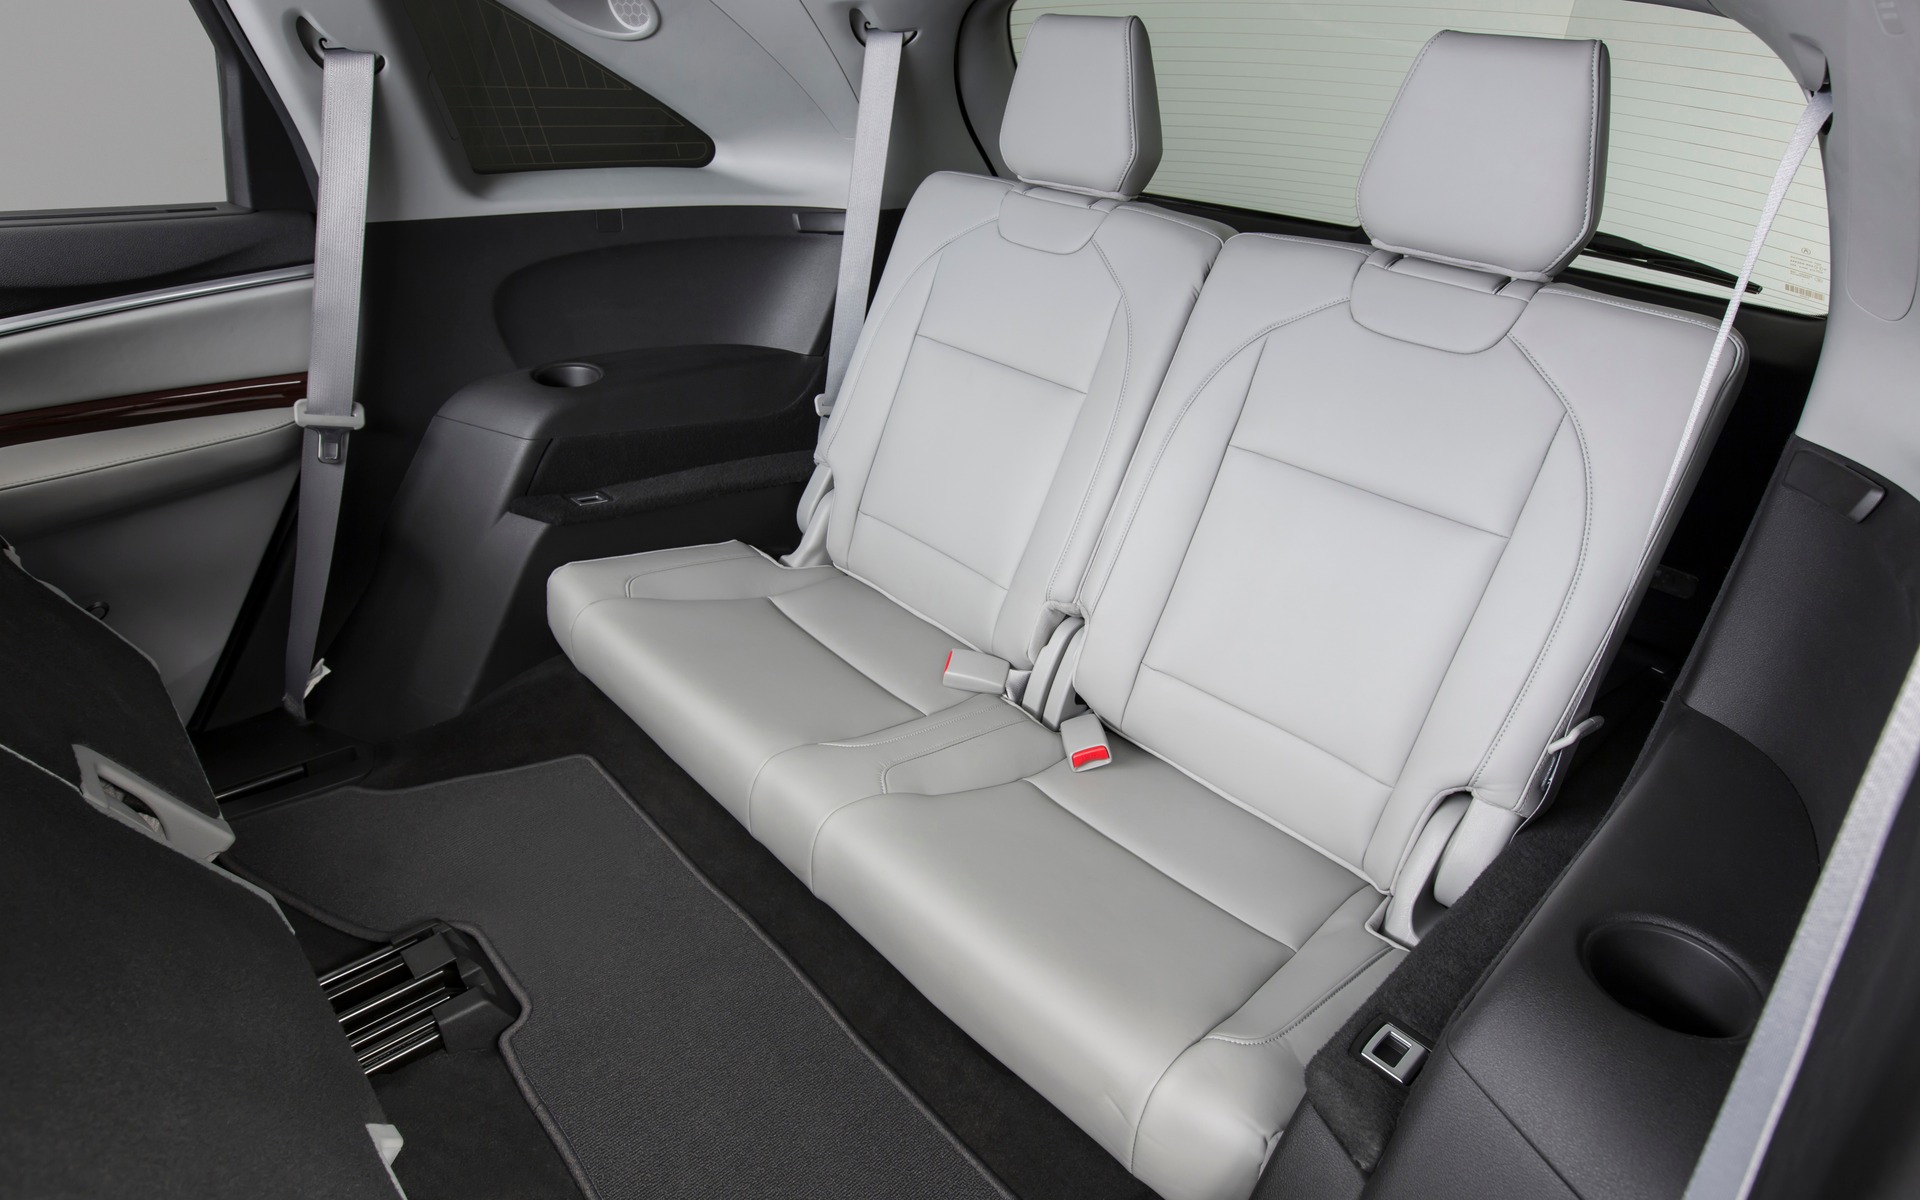 The Acura MDX can accommodate up to seven passengers.